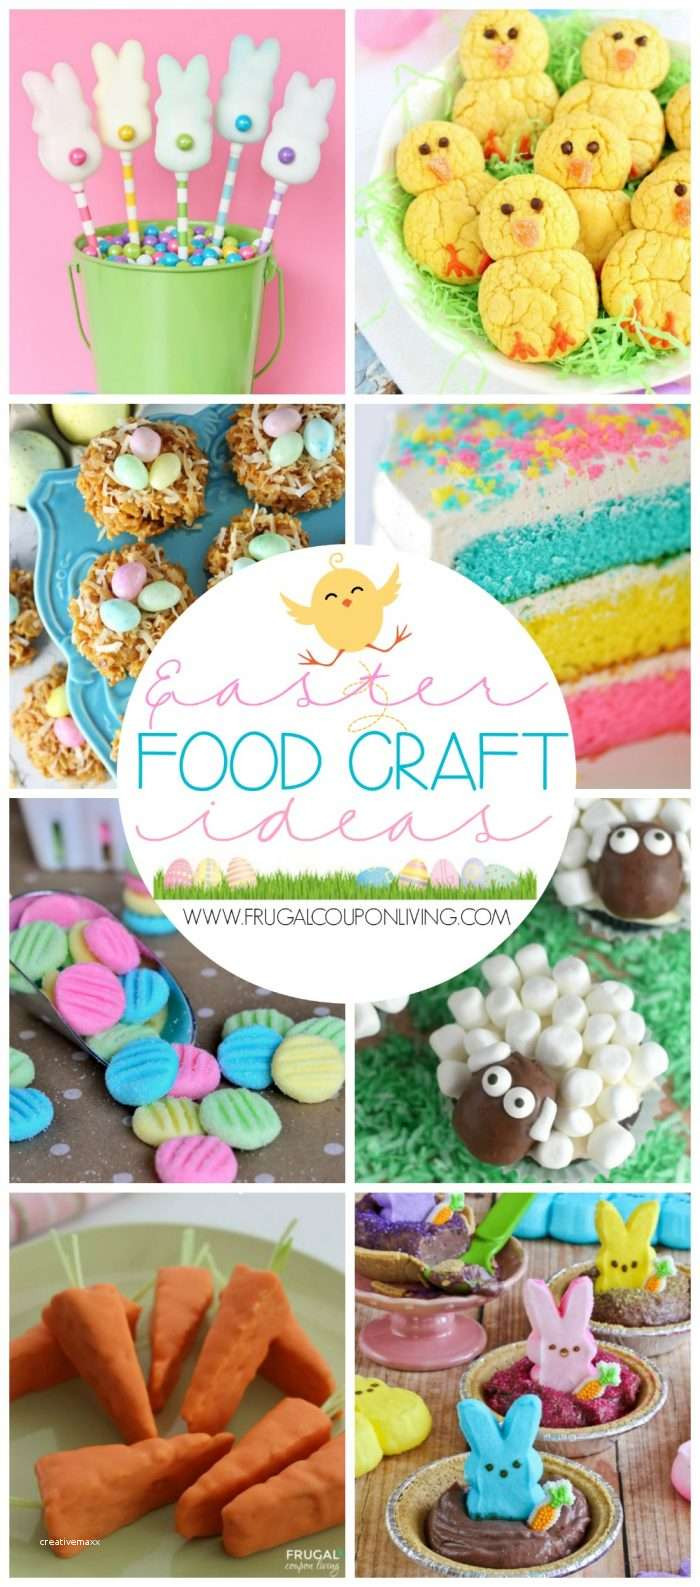 Food Ideas For Easter Party
 Easter food ideas for party fresh easter food craft ideas